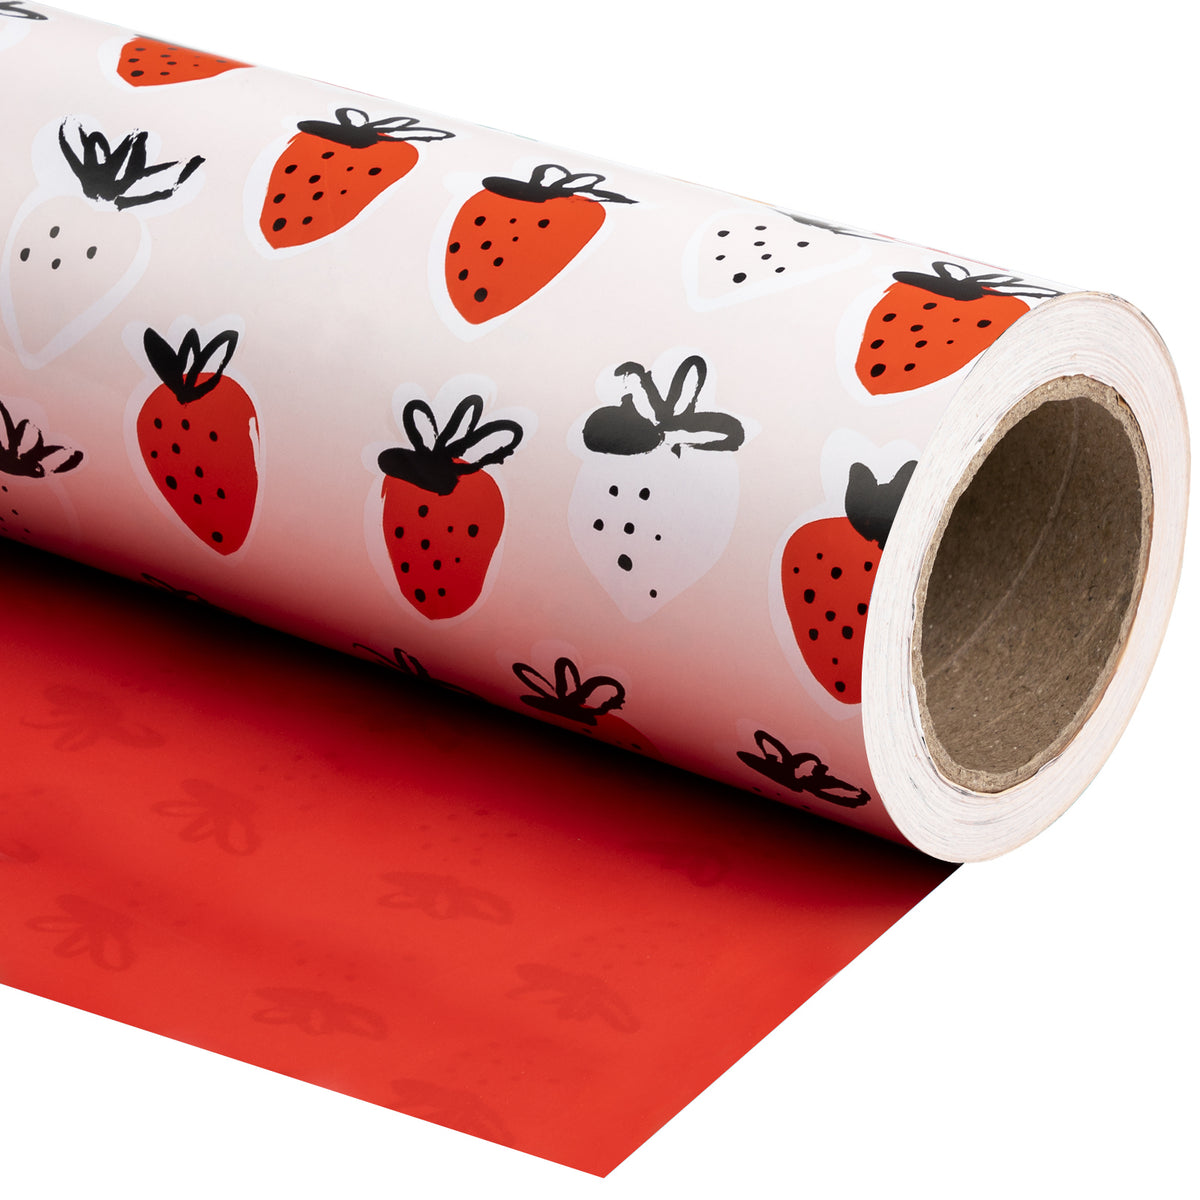 Strawberry Patch- Strawberry Pattern Wrapping Paper by Touch of